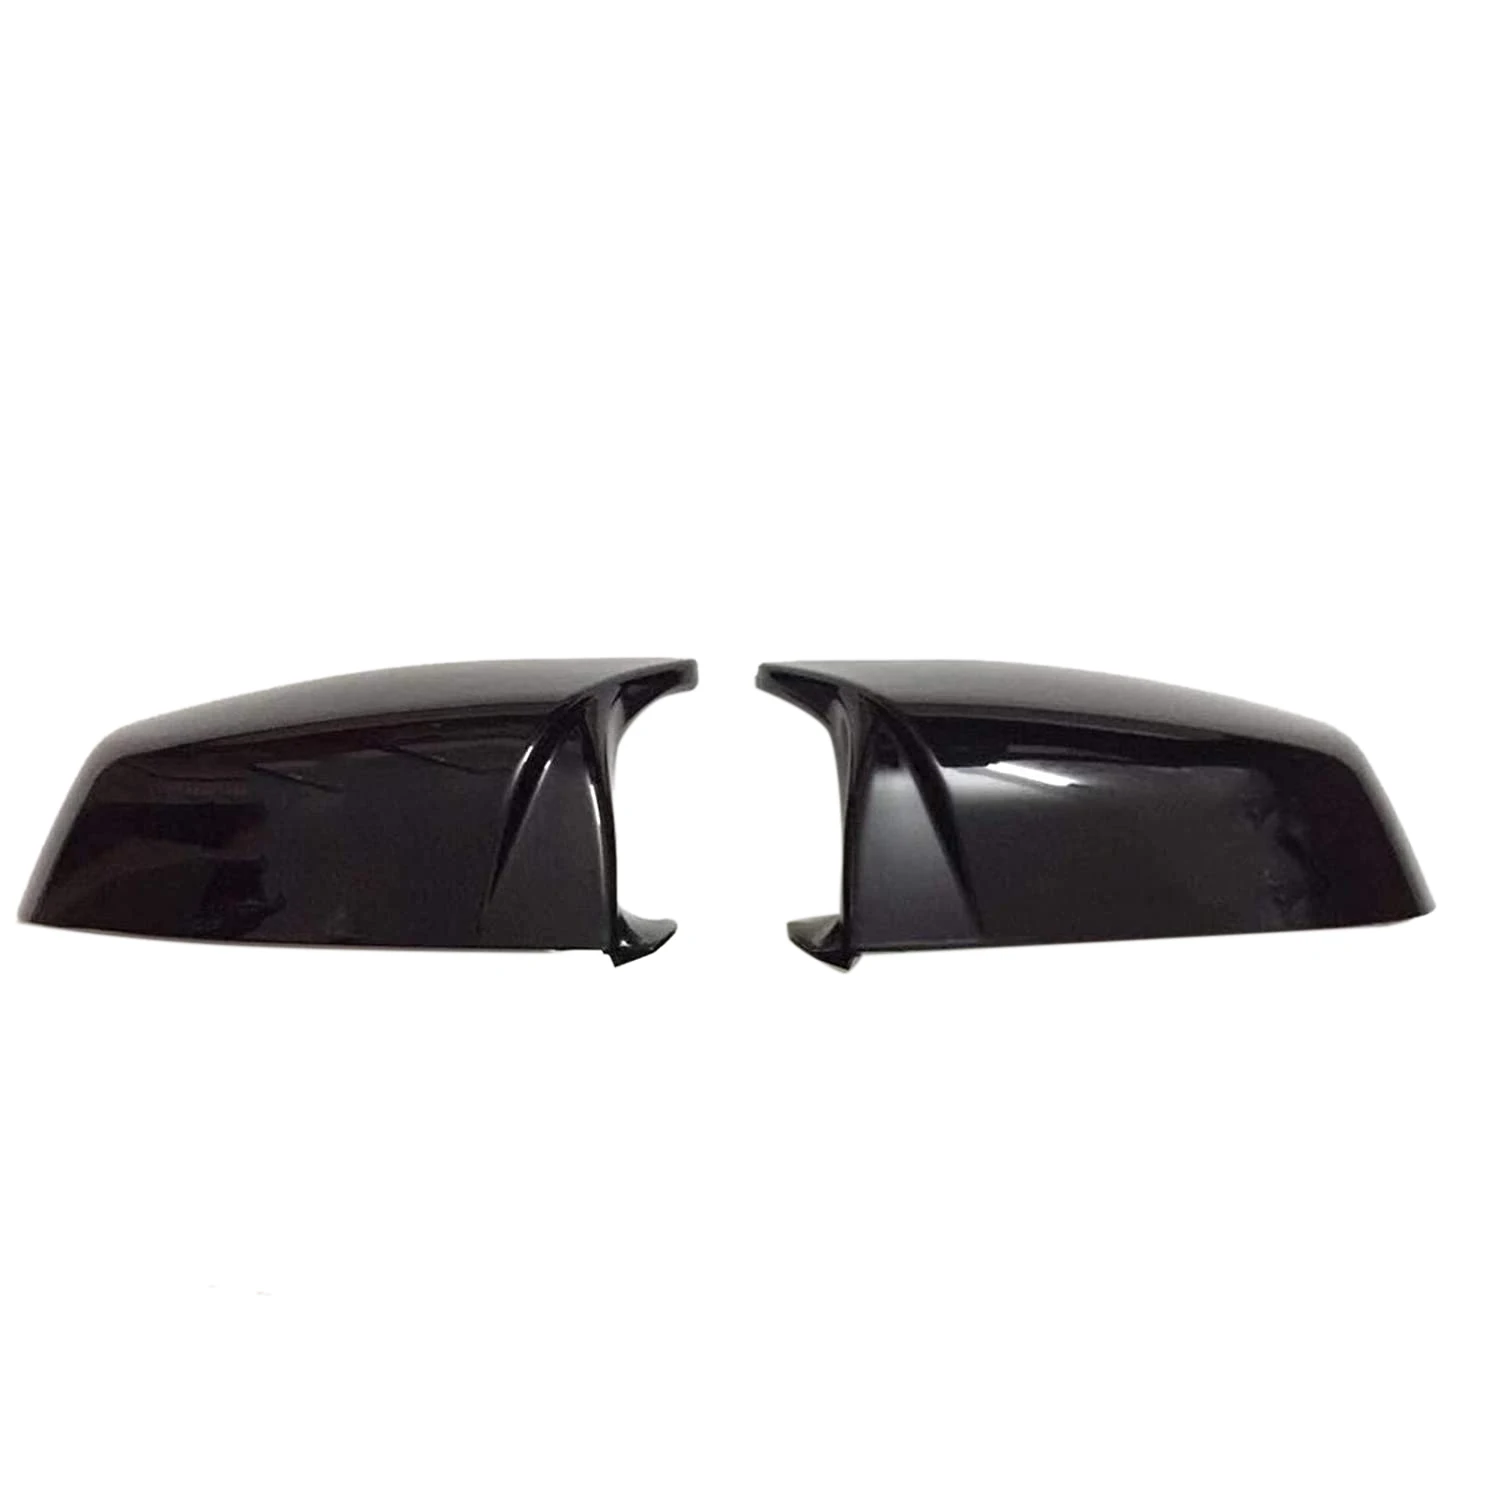 

Car Side Wing Rearview Mirror Cover Cap For-BMW 5 6 7 Series E60 E61 E63 E64 F01 F02-F04 F06 F07 F10 F11 F12 F13